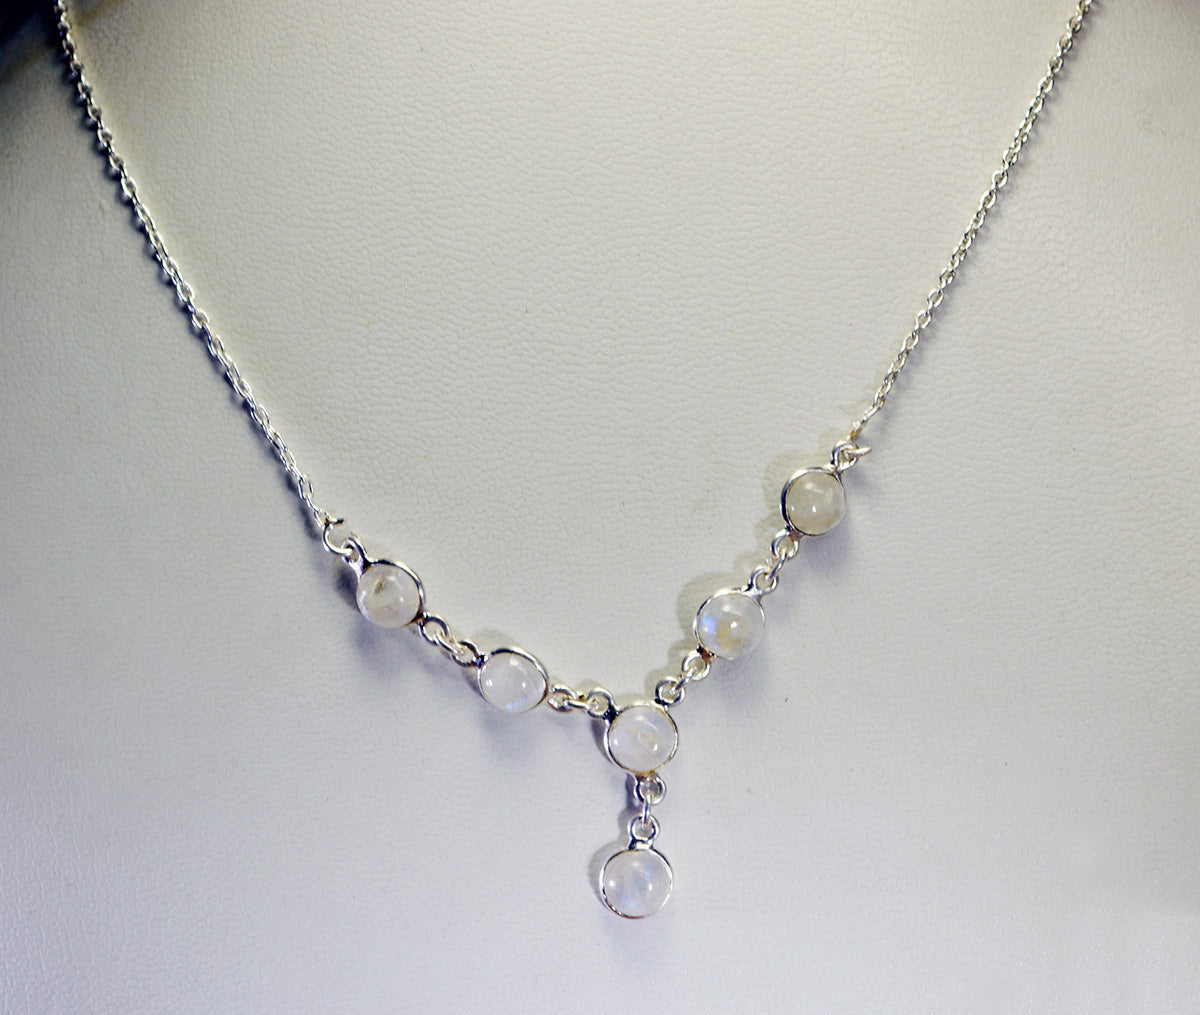 casually 925 Solid Sterling Silver pulchritudinous genuine White Necklace gift UK